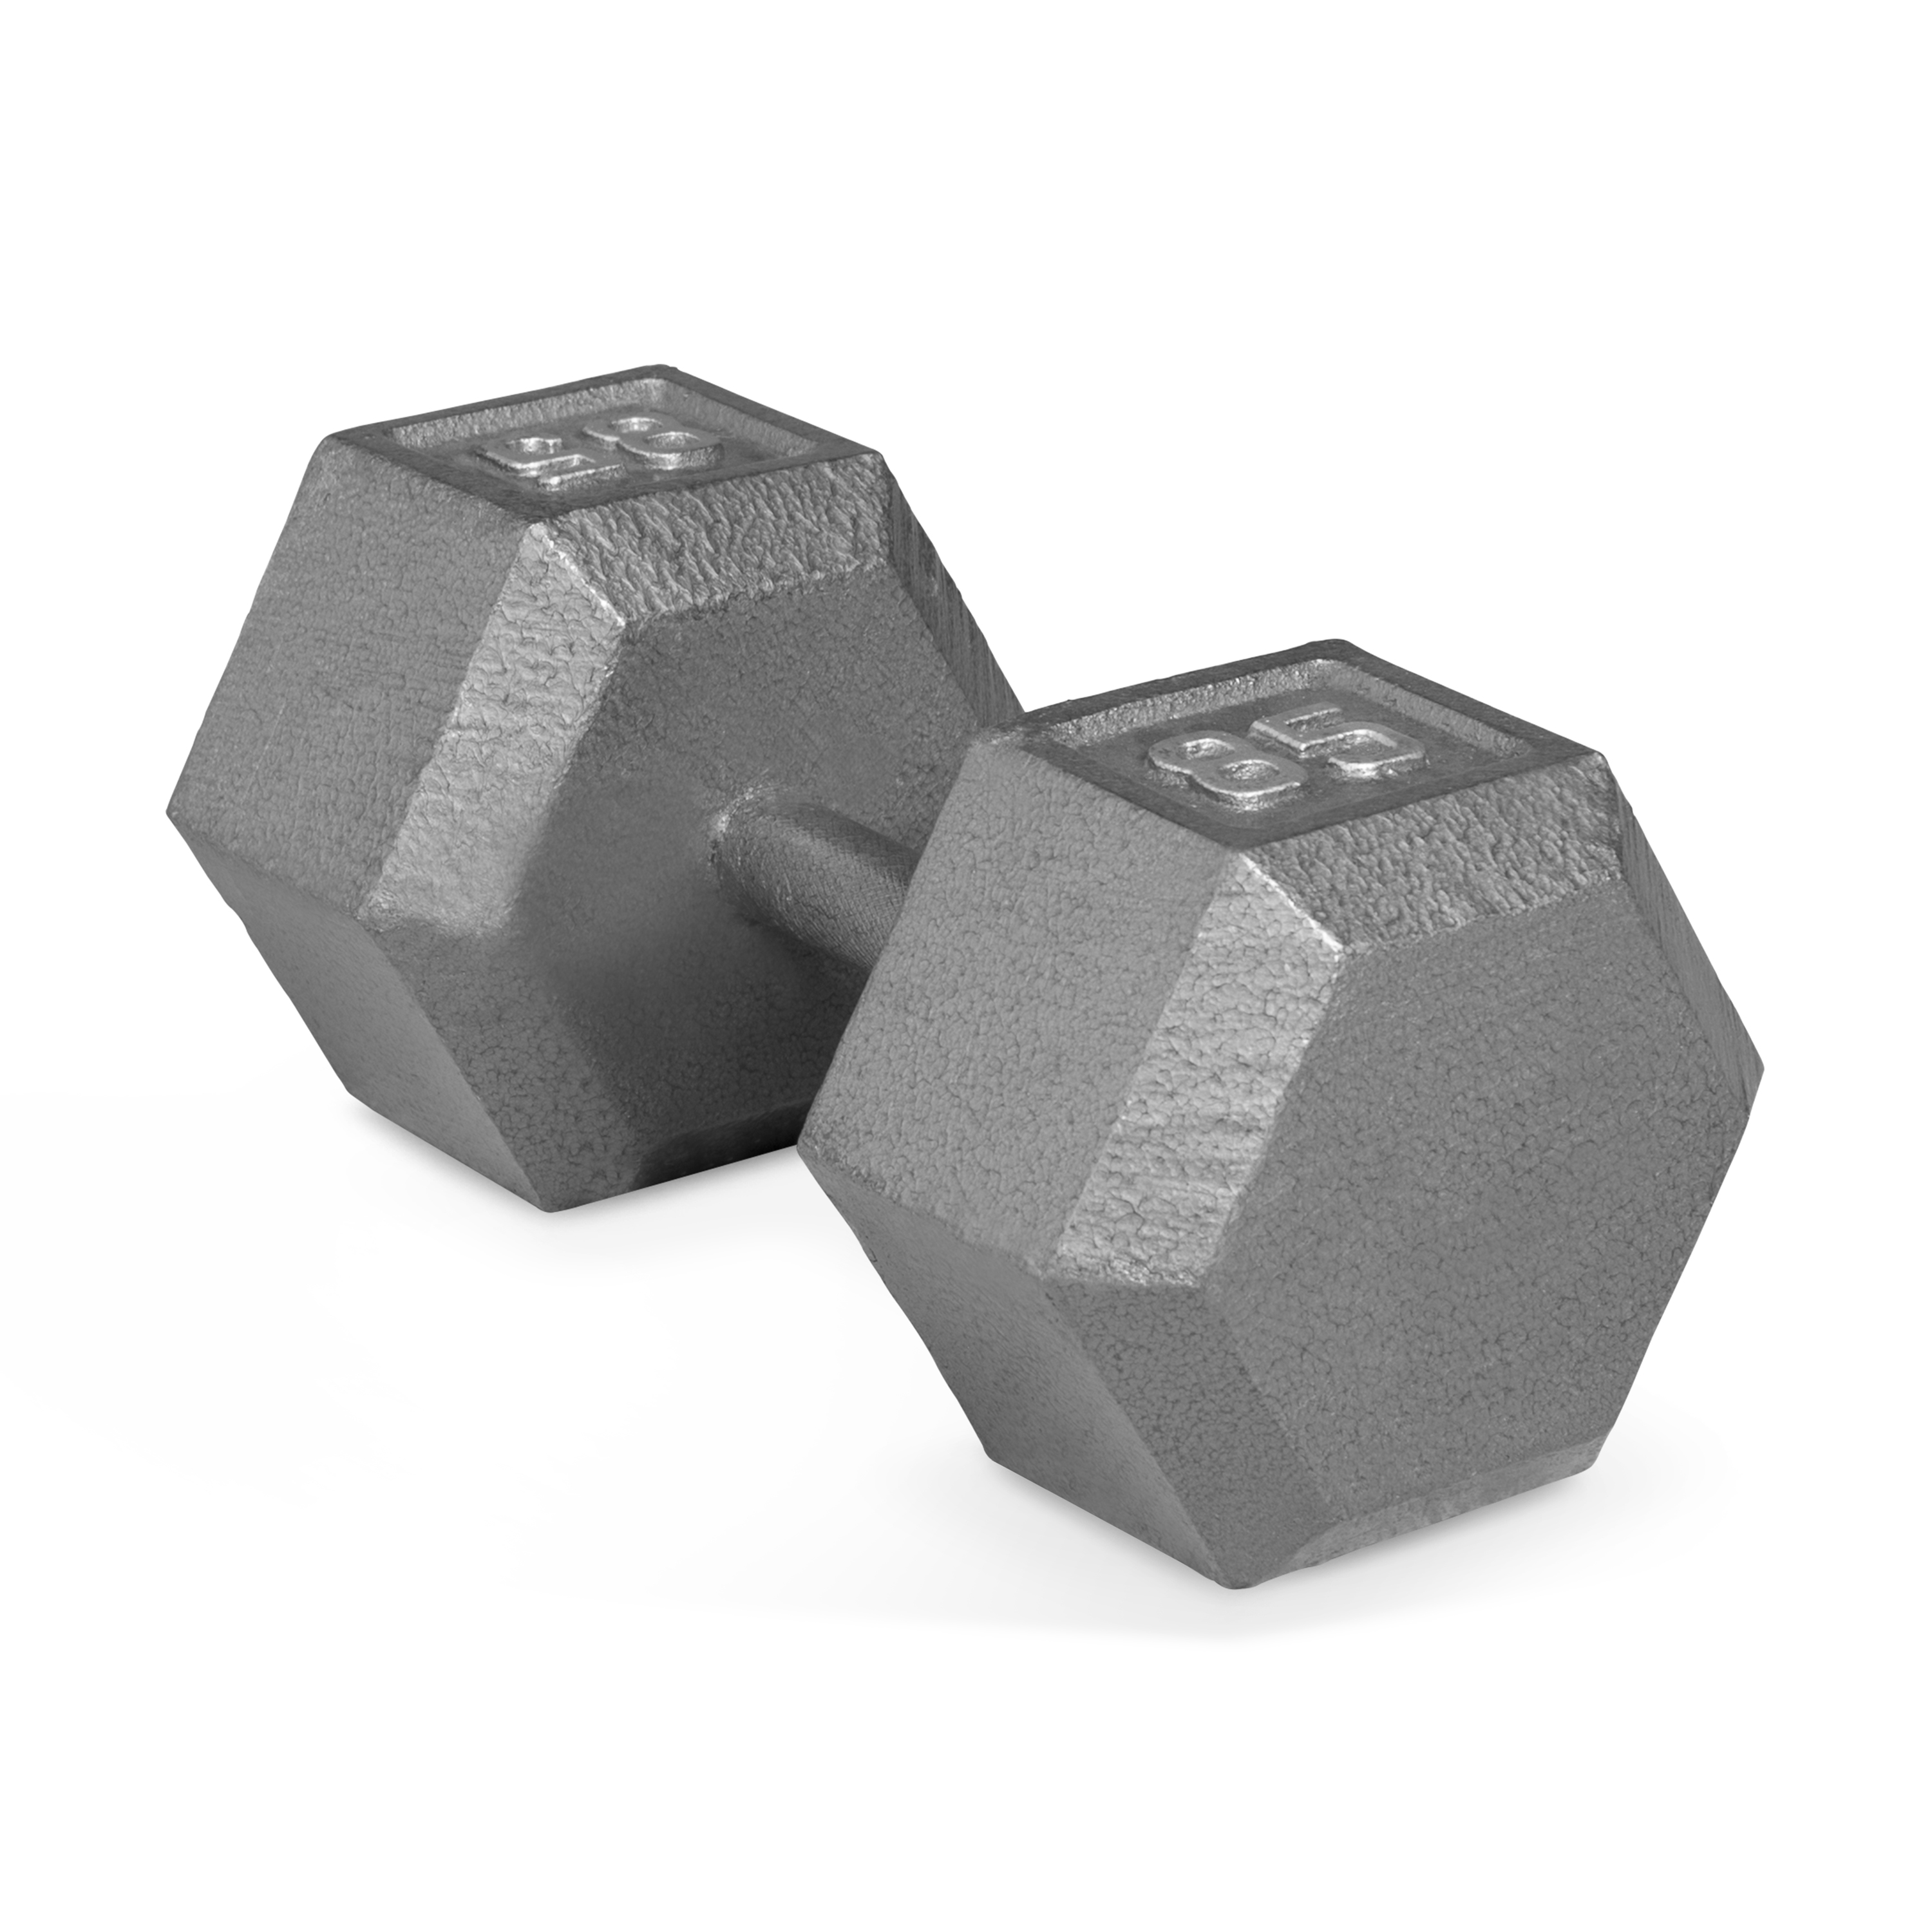 CAP Barbell 85lb Cast Iron Hex Dumbbell, Single - image 1 of 6